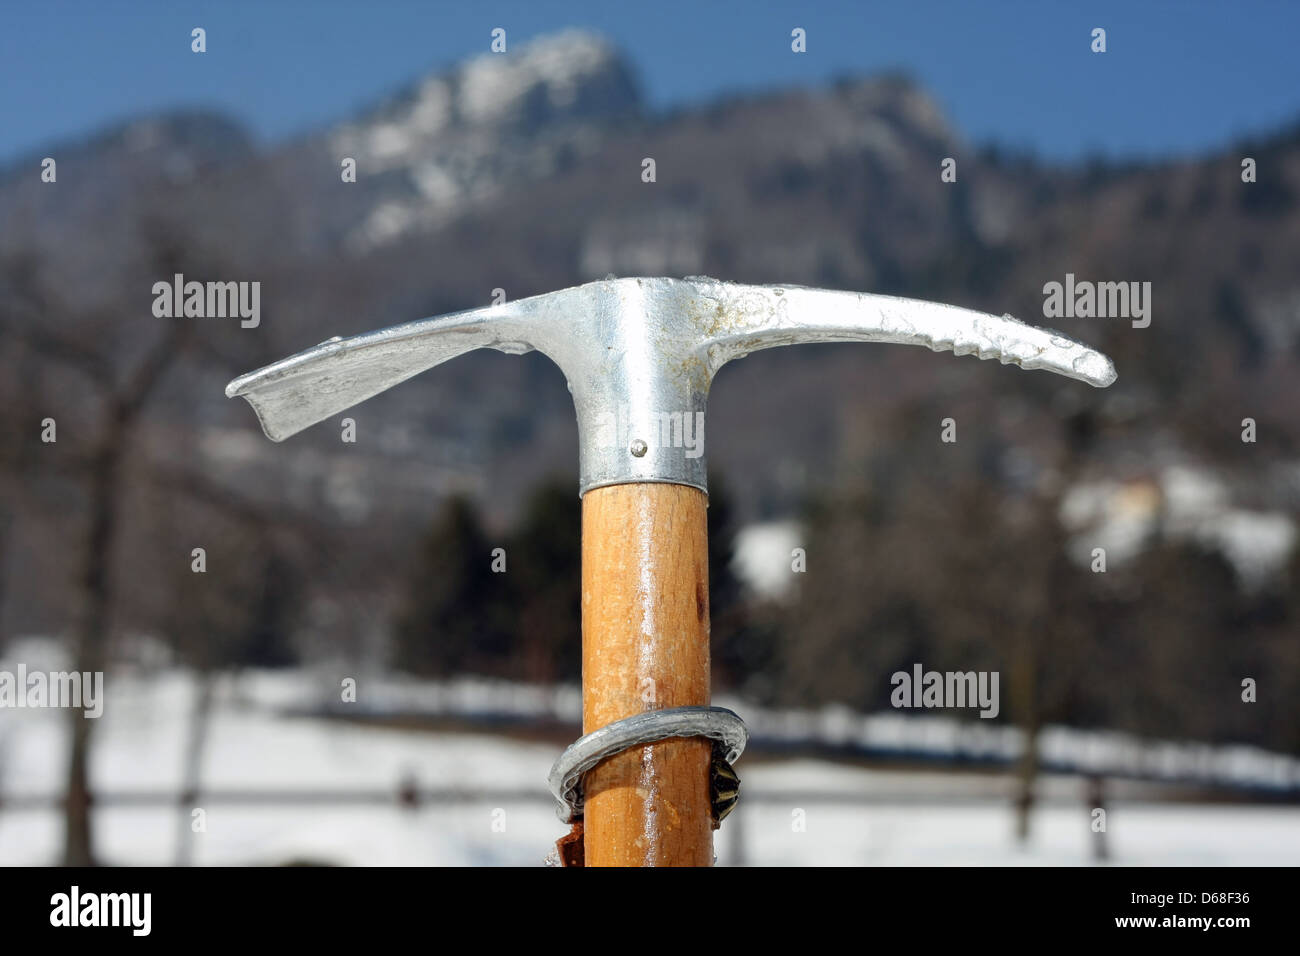 professionale ice axe to climbing with sturdy wood handle Stock Photo